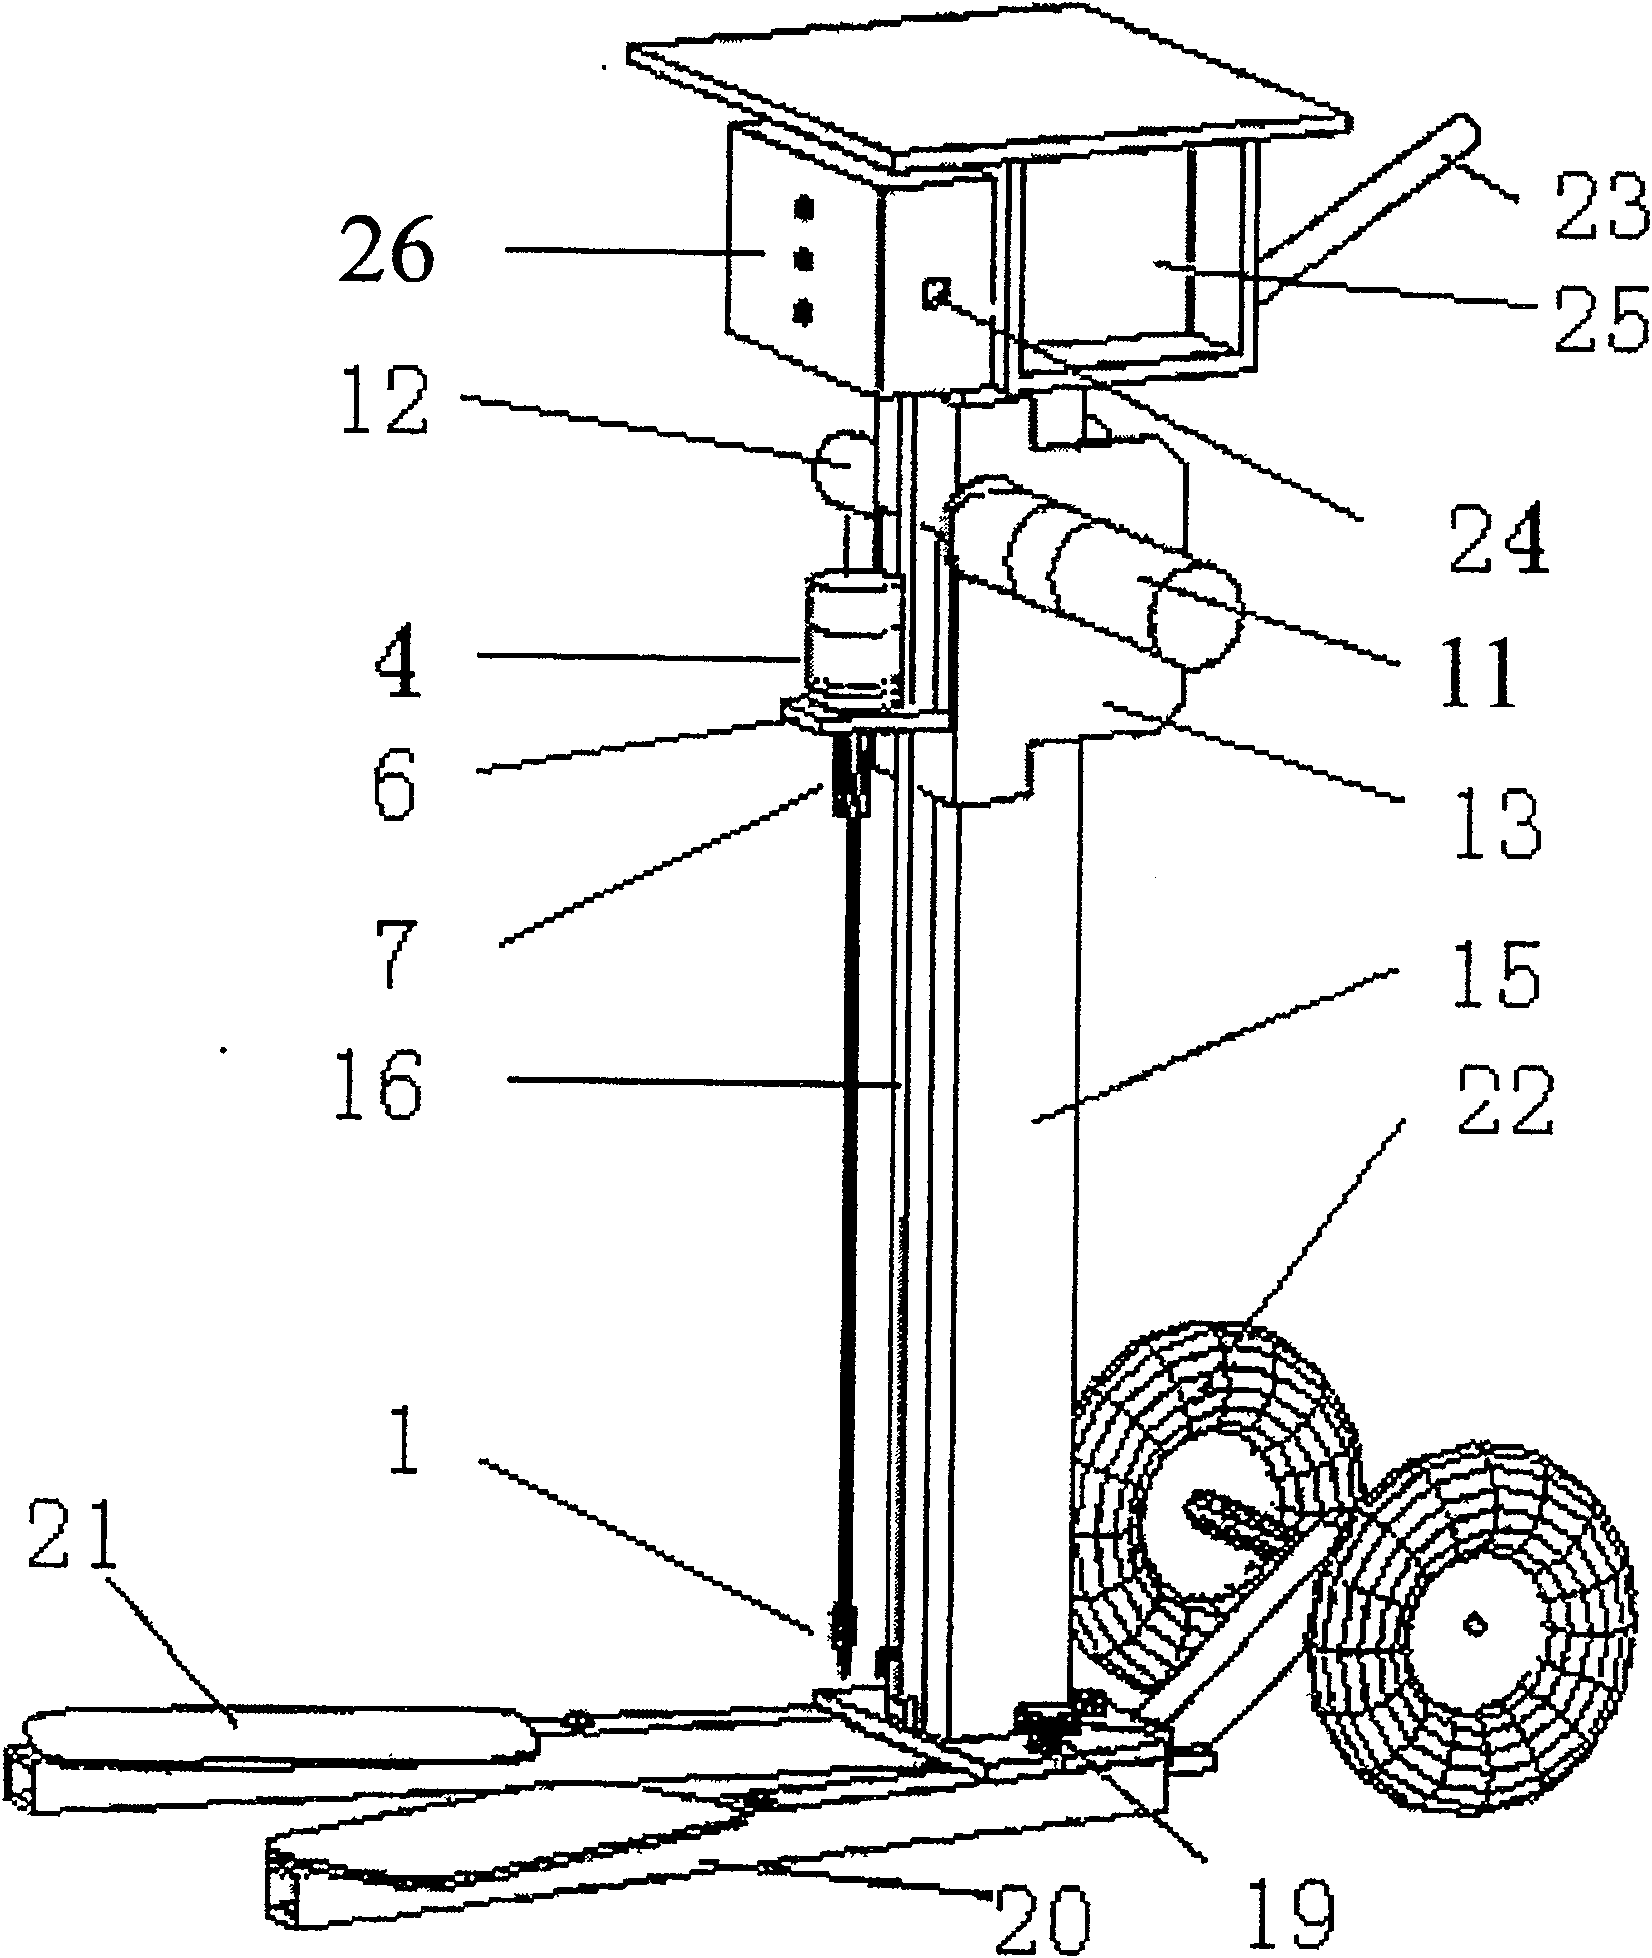 Measuring apparatus for synchronously and real-time measuring for three parameters of soil